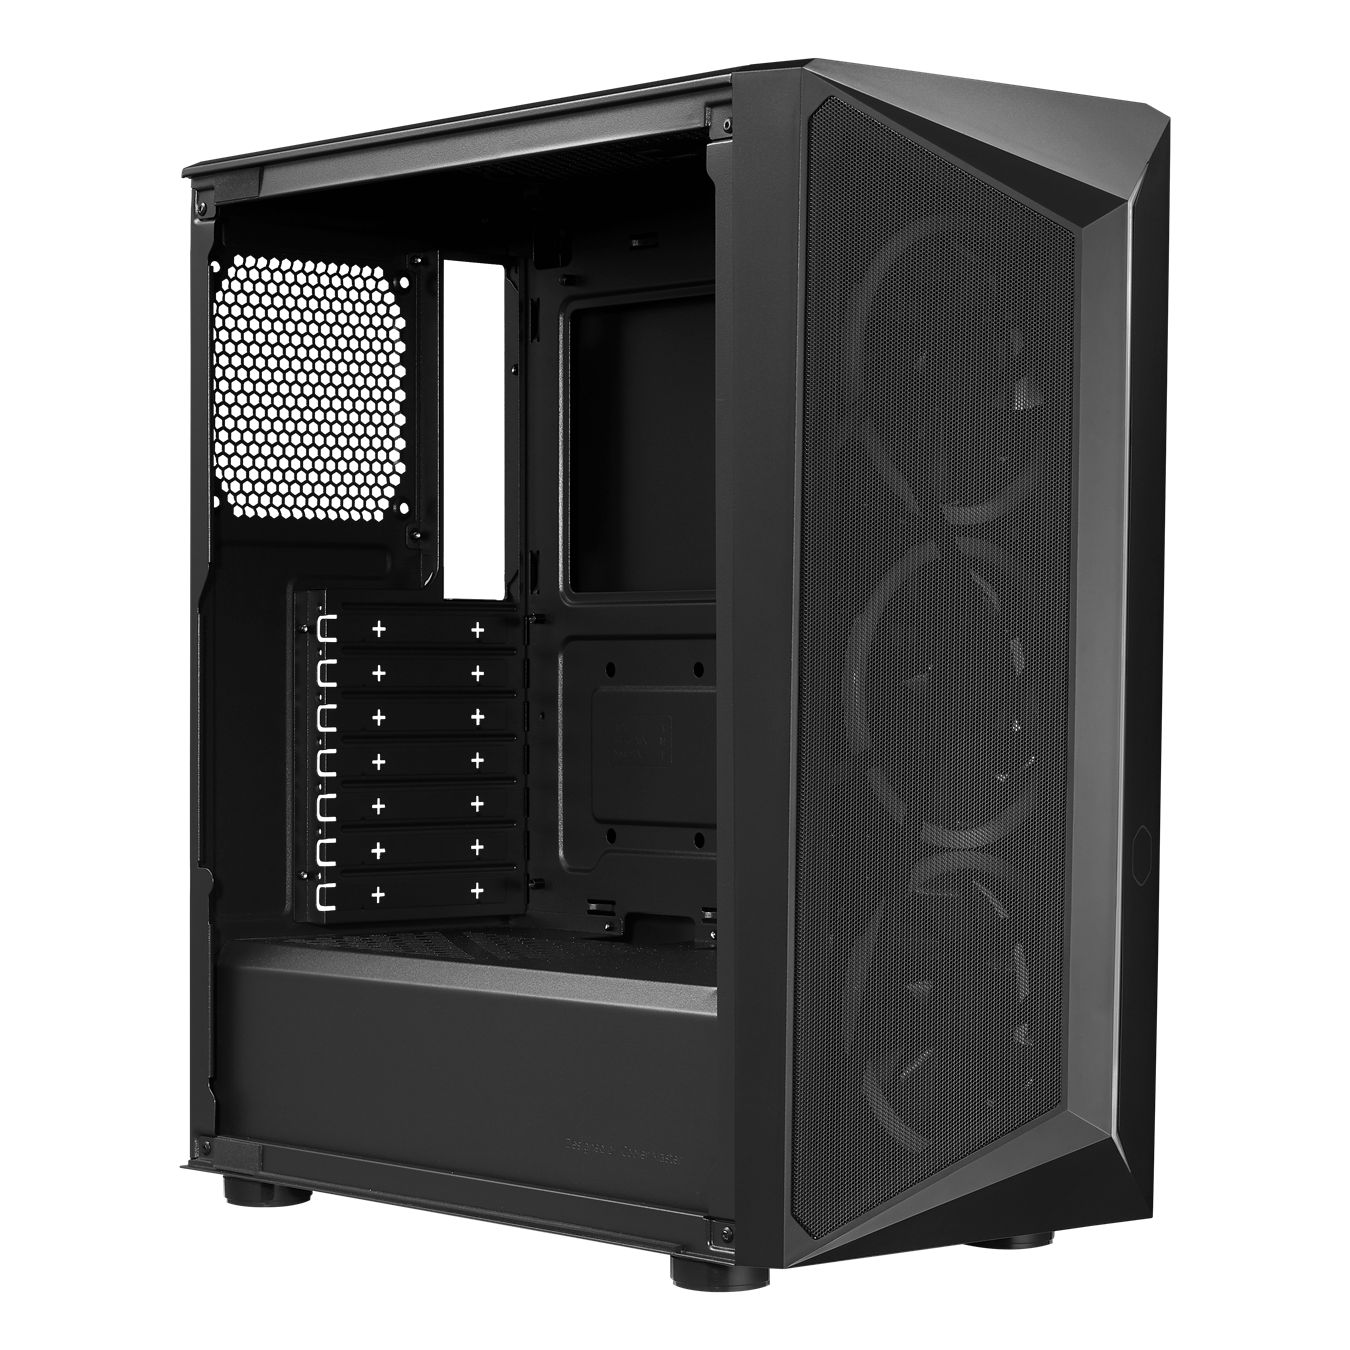 CMP 510 Mid Tower PC Case - the front panel is constructed with a substantially large, unrestricted intake grill to provide superb airflow to the system.